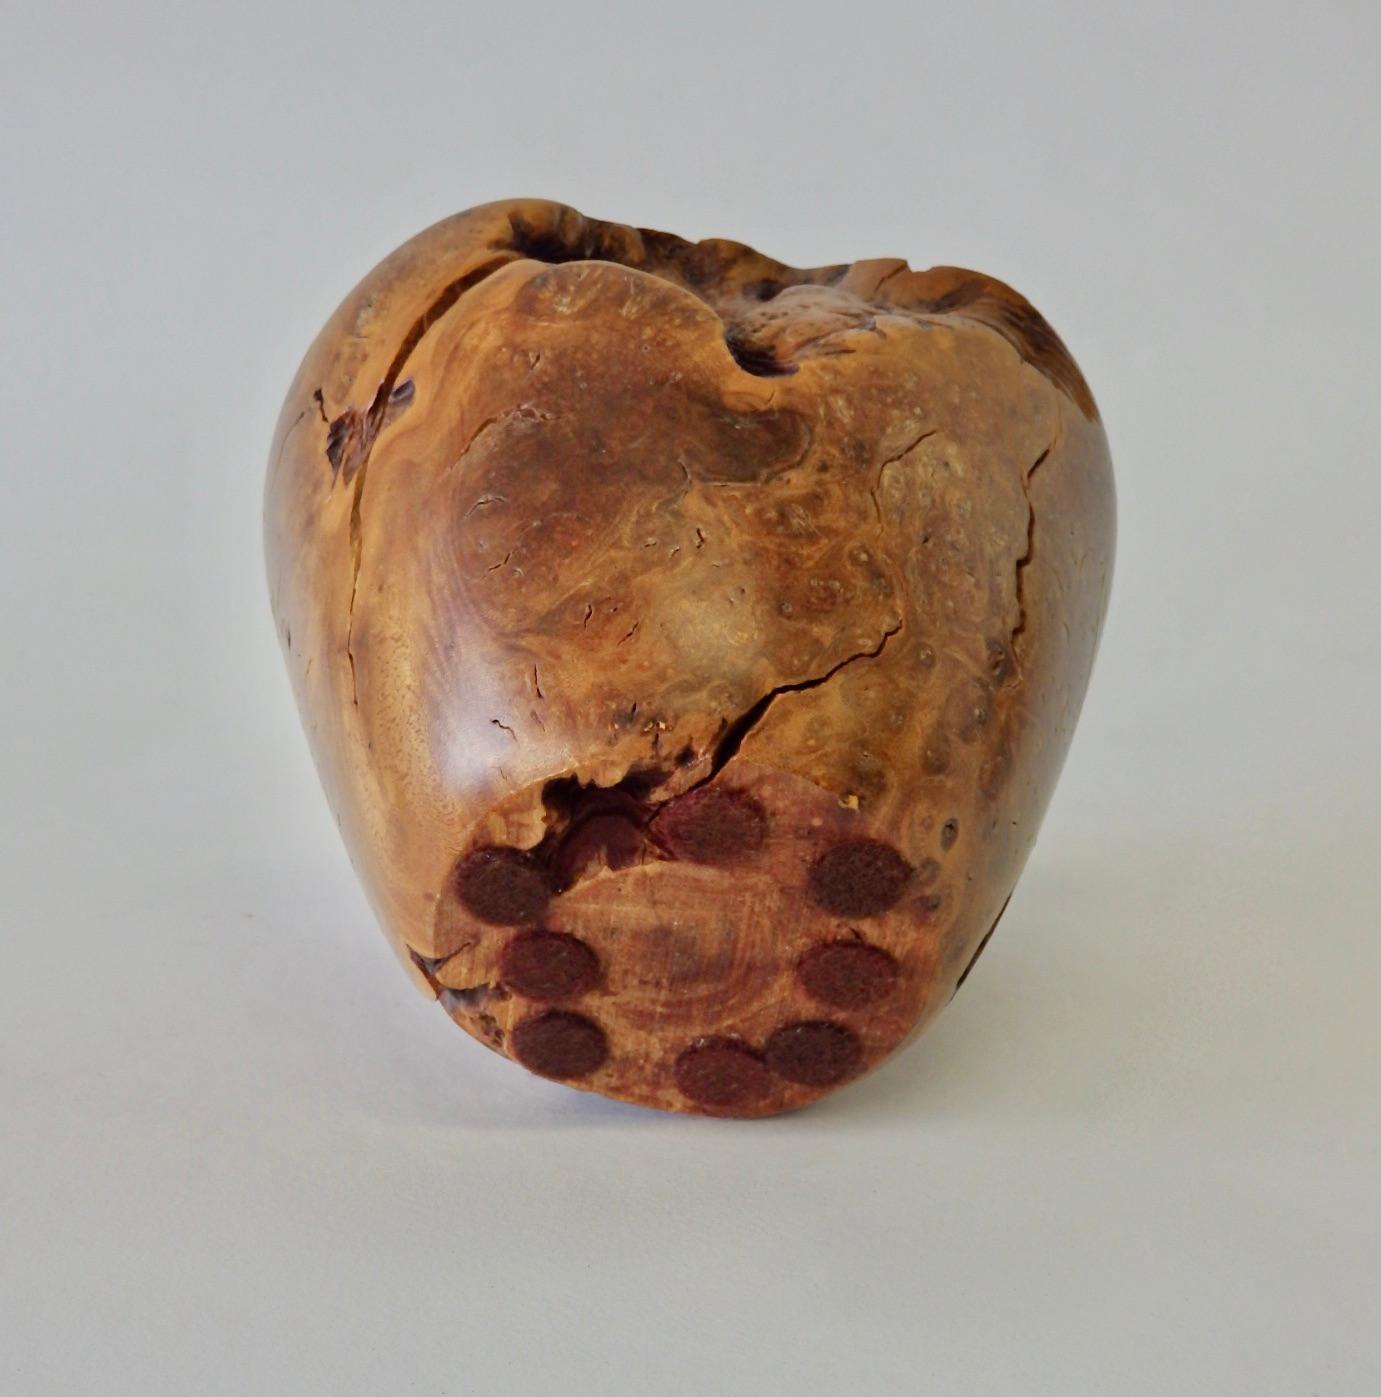 American Turned Burl Wood Weed Pot with Quartz Stone Inclusion